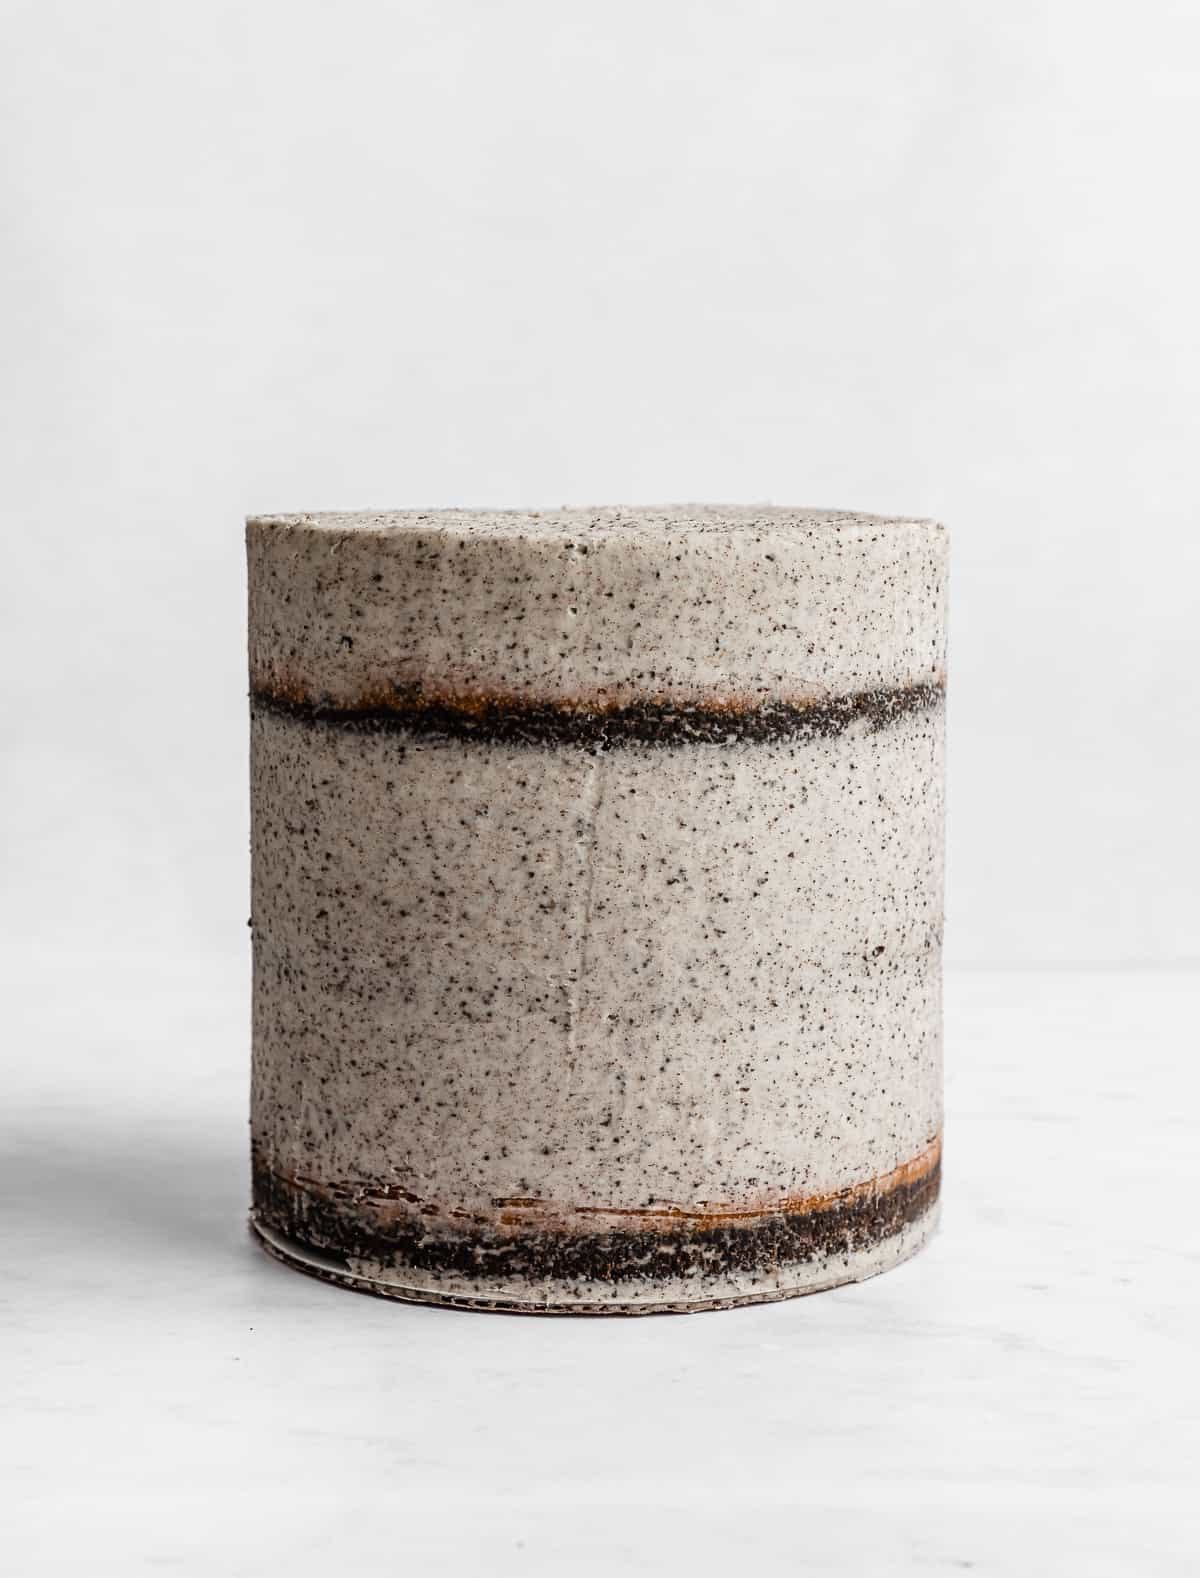 A three tiered six inch cake covered in a cookies and cream crumb coat, on a white background.